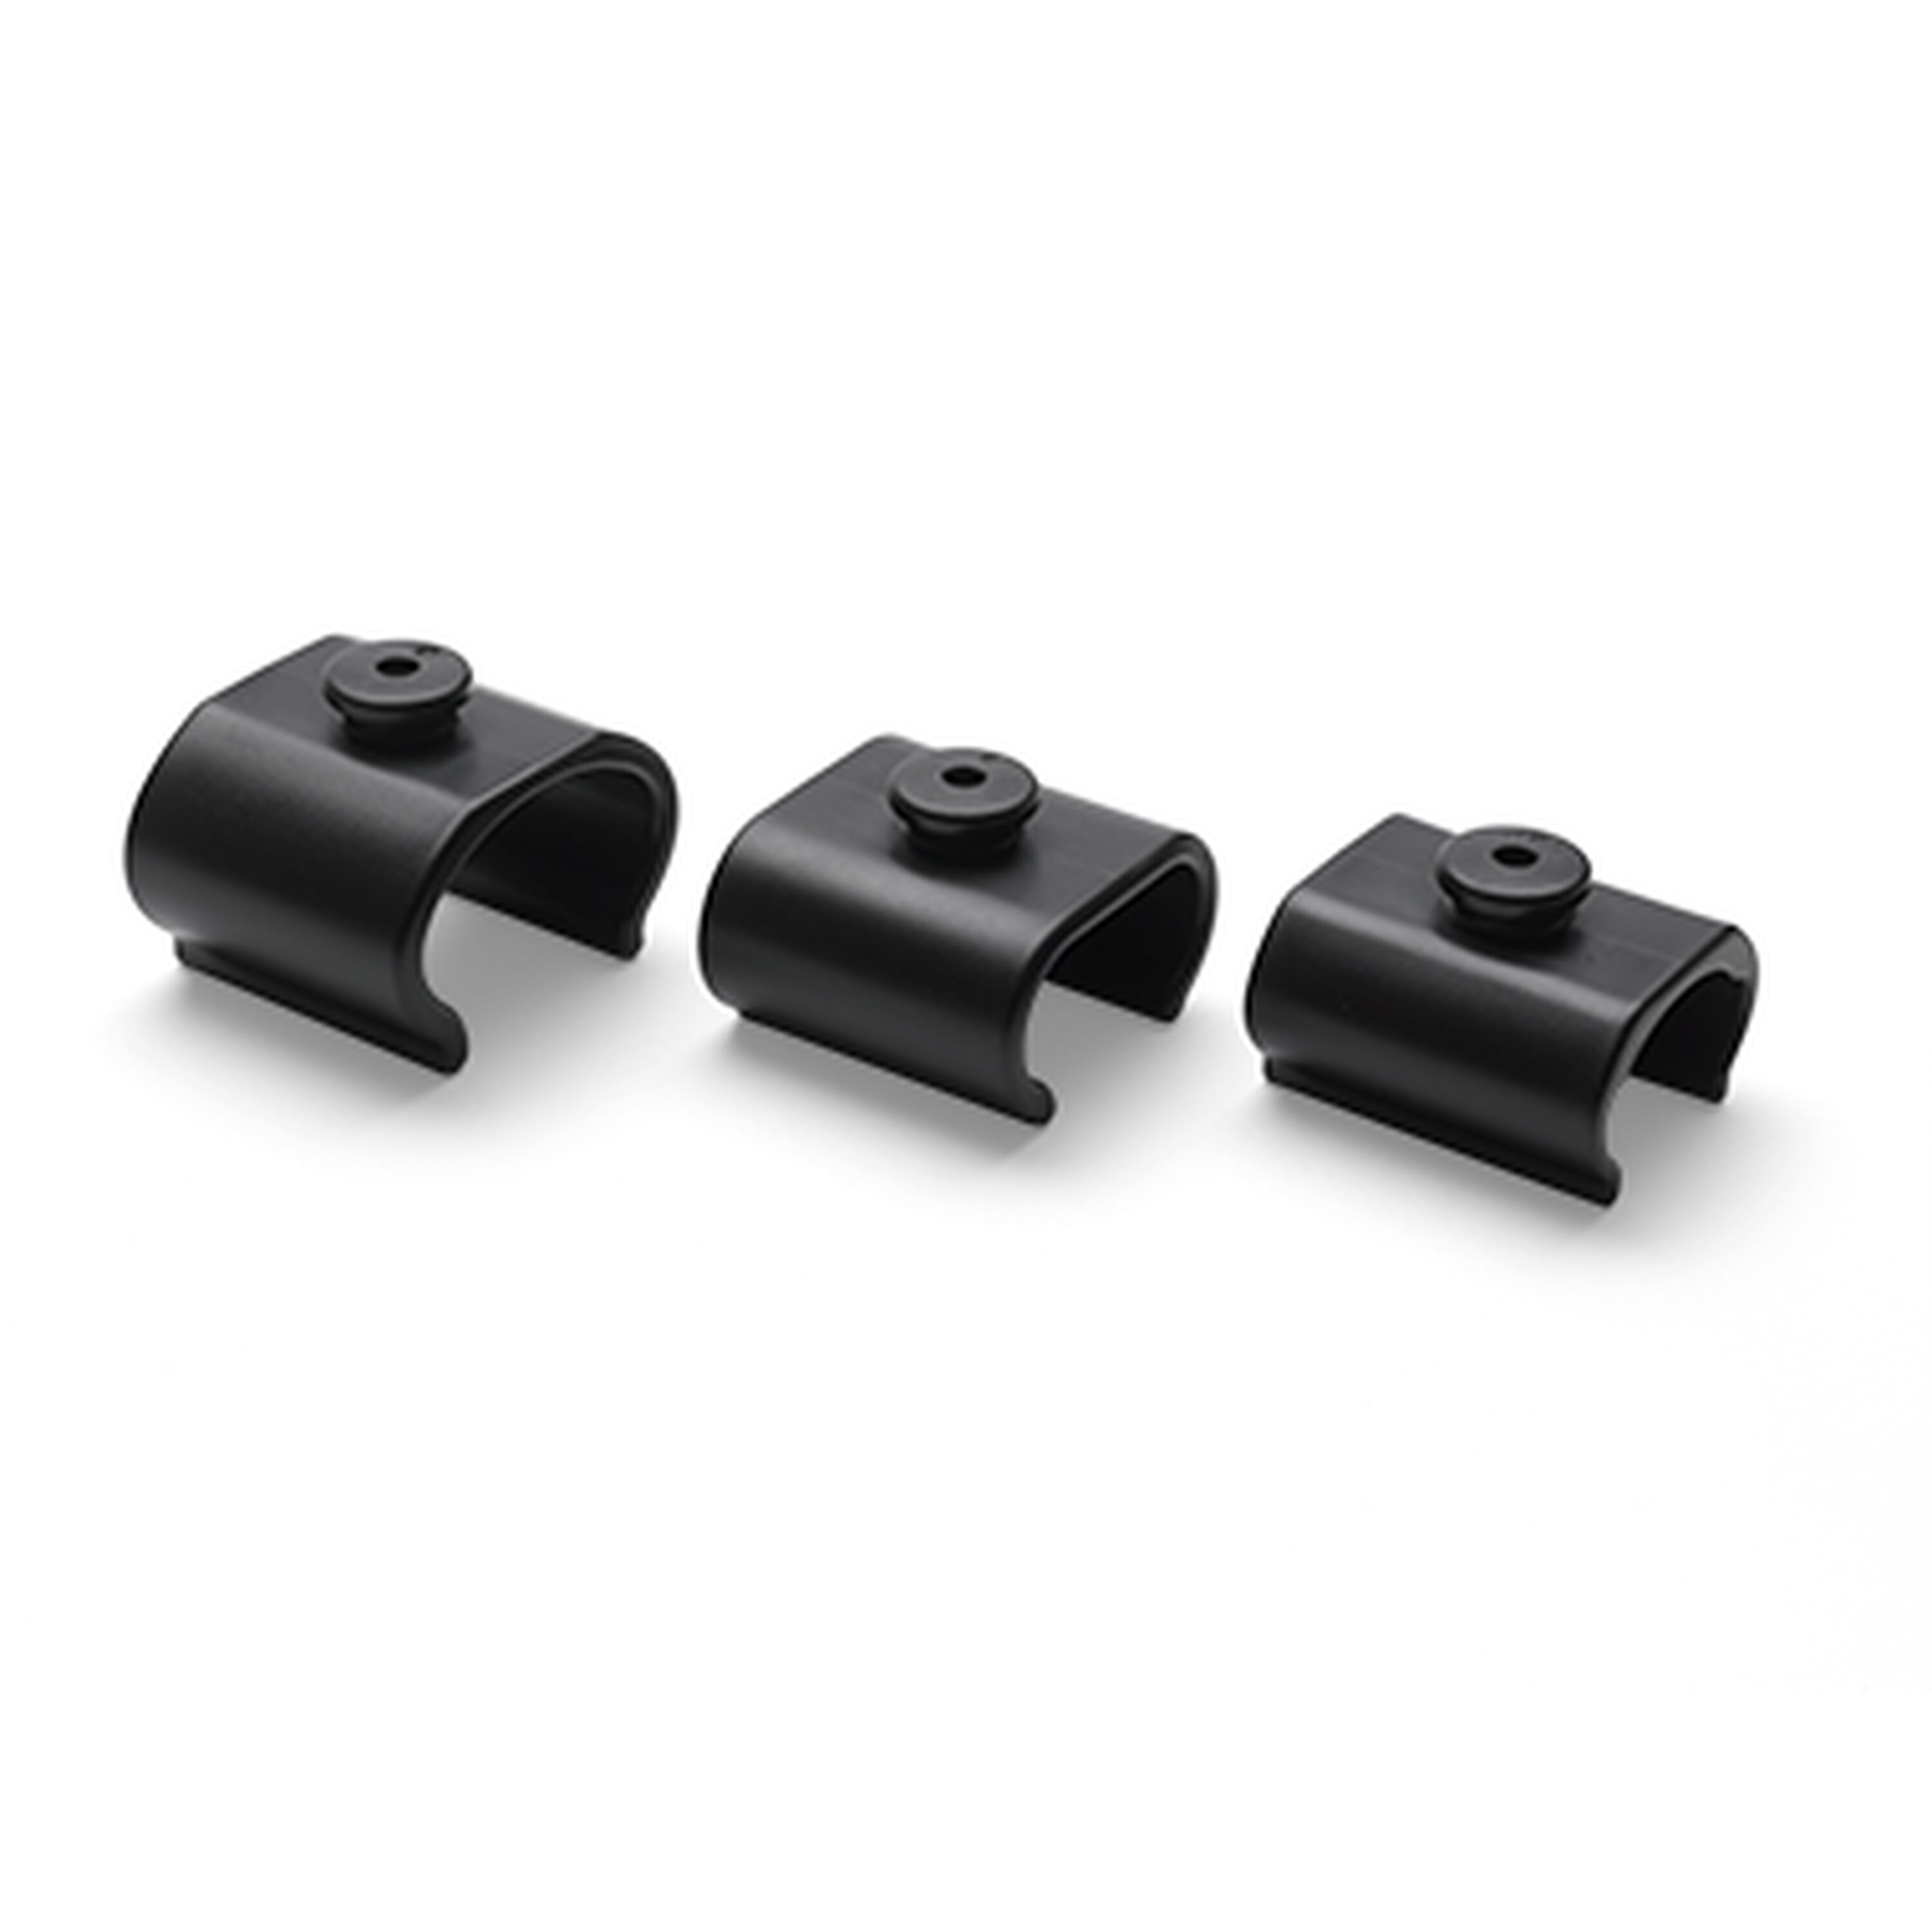 Bugaboo Cup Holder Adapter Set